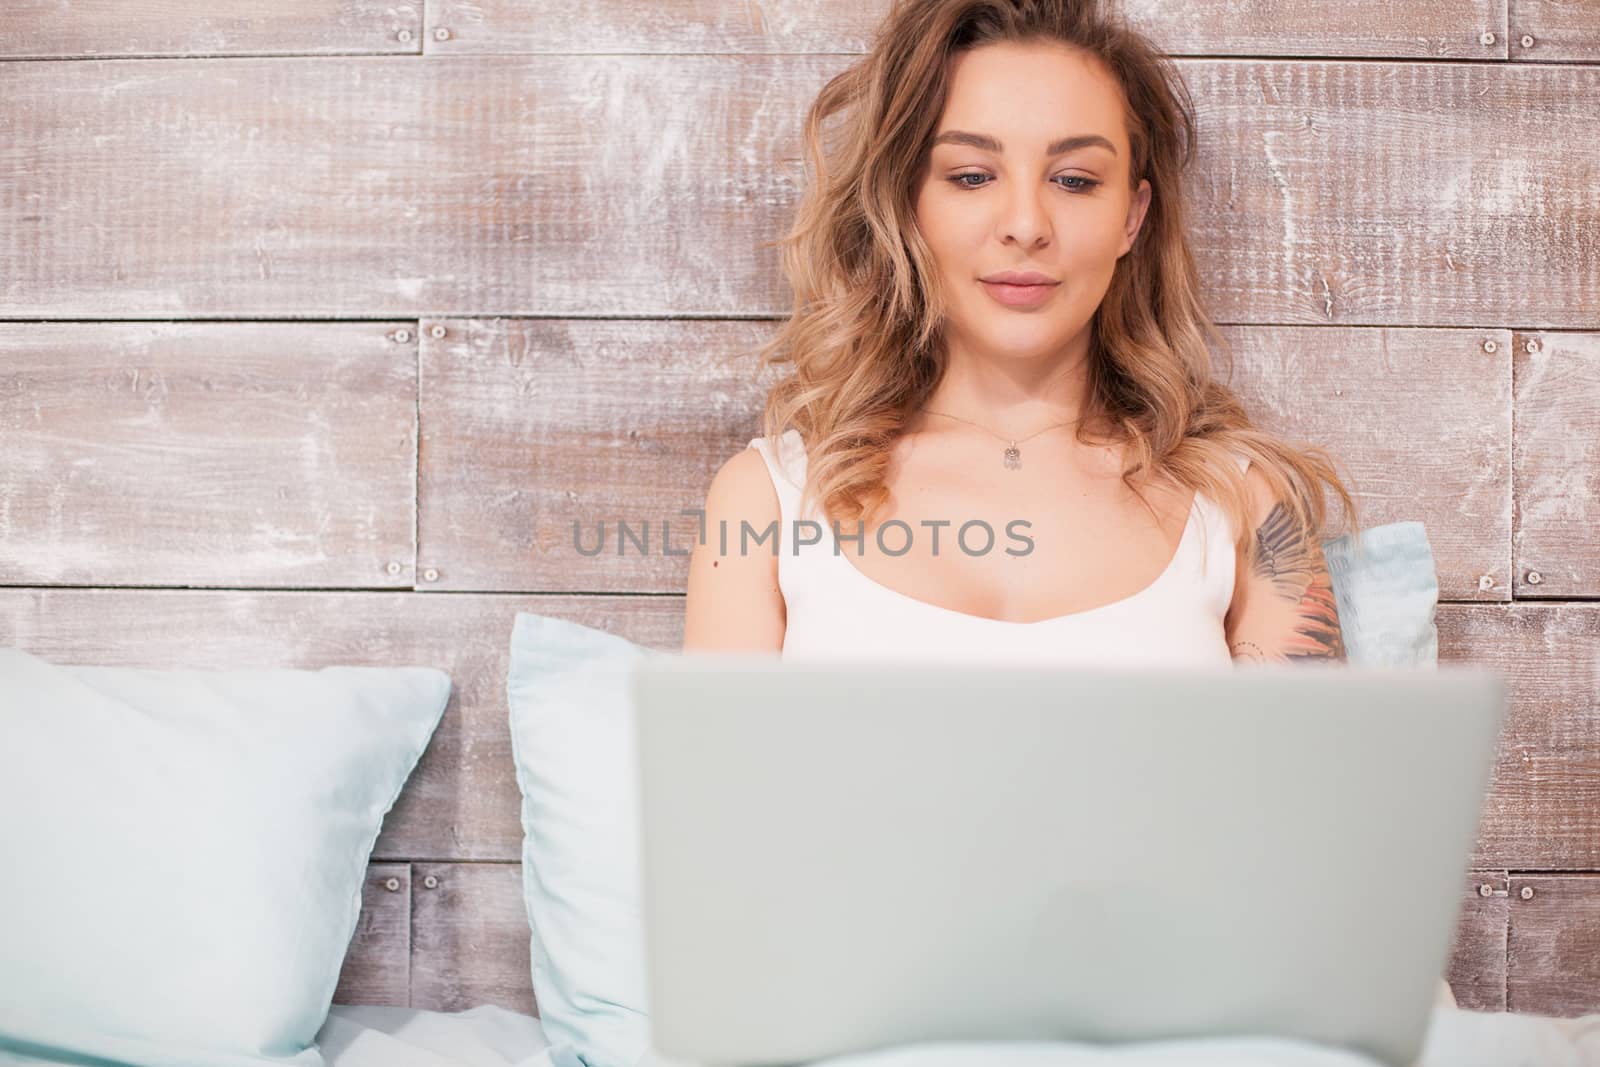 Pretty blonde woman working late at night on her laptop wearing pajamas .